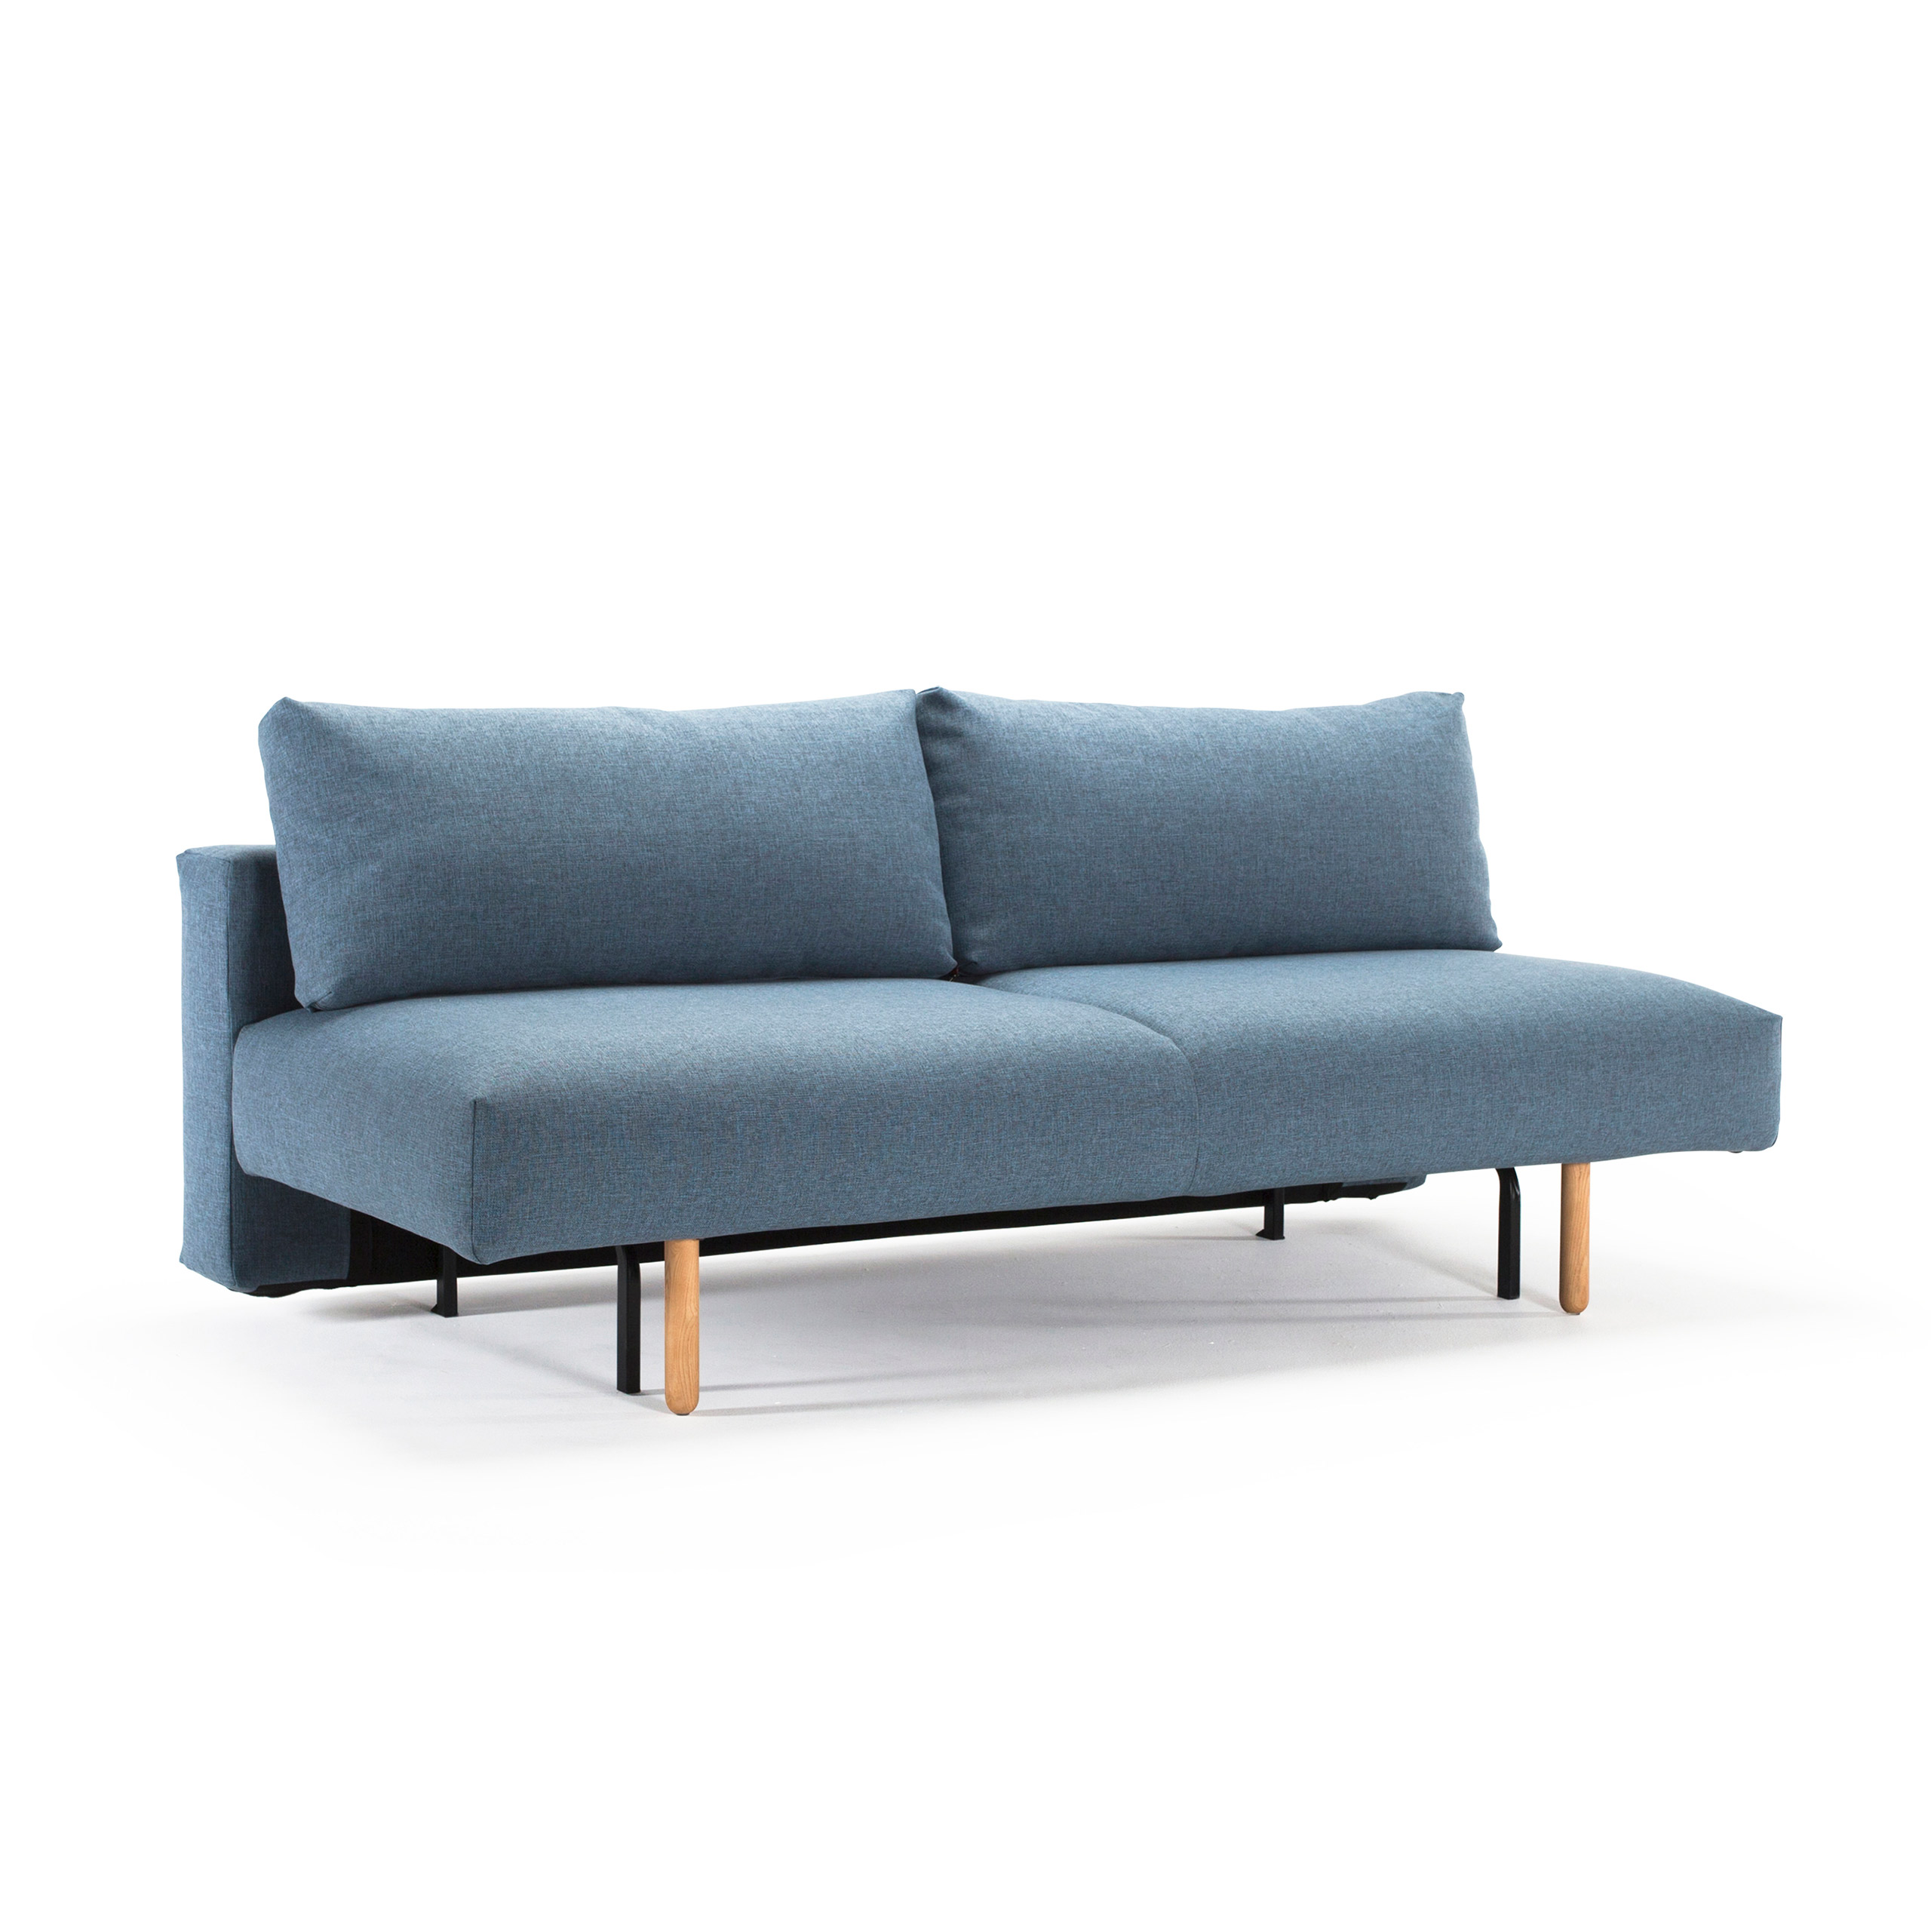 Frode Sofa Bed Timeless Design By, Scandinavian Style Sofa Bed